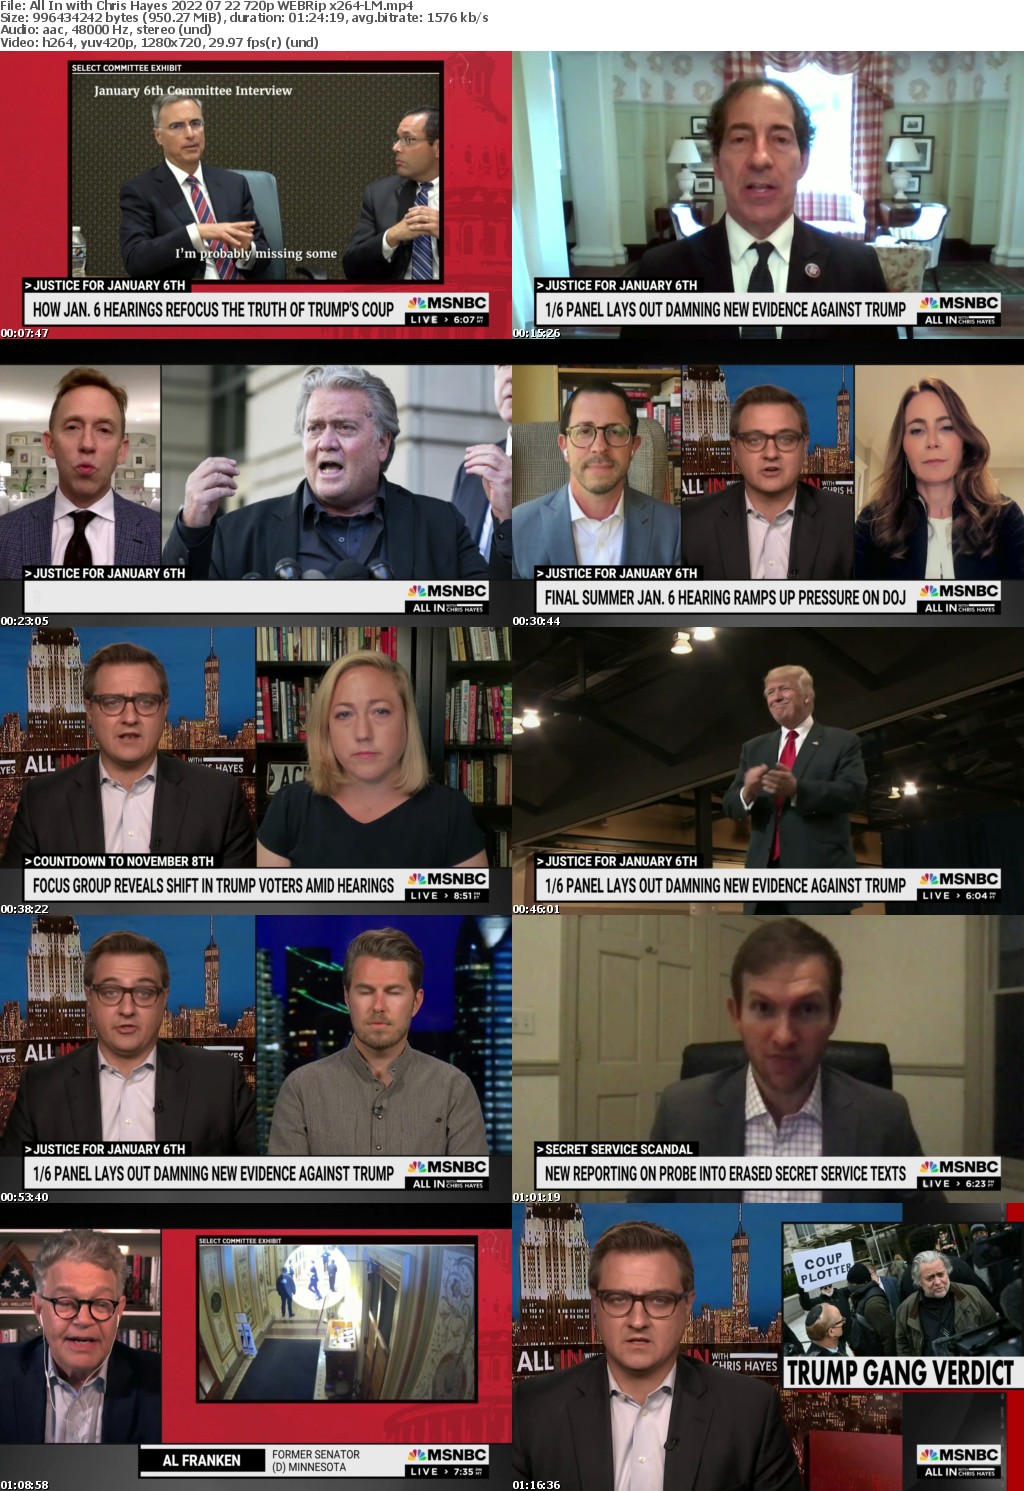 All In with Chris Hayes 2022 07 22 720p WEBRip x264-LM